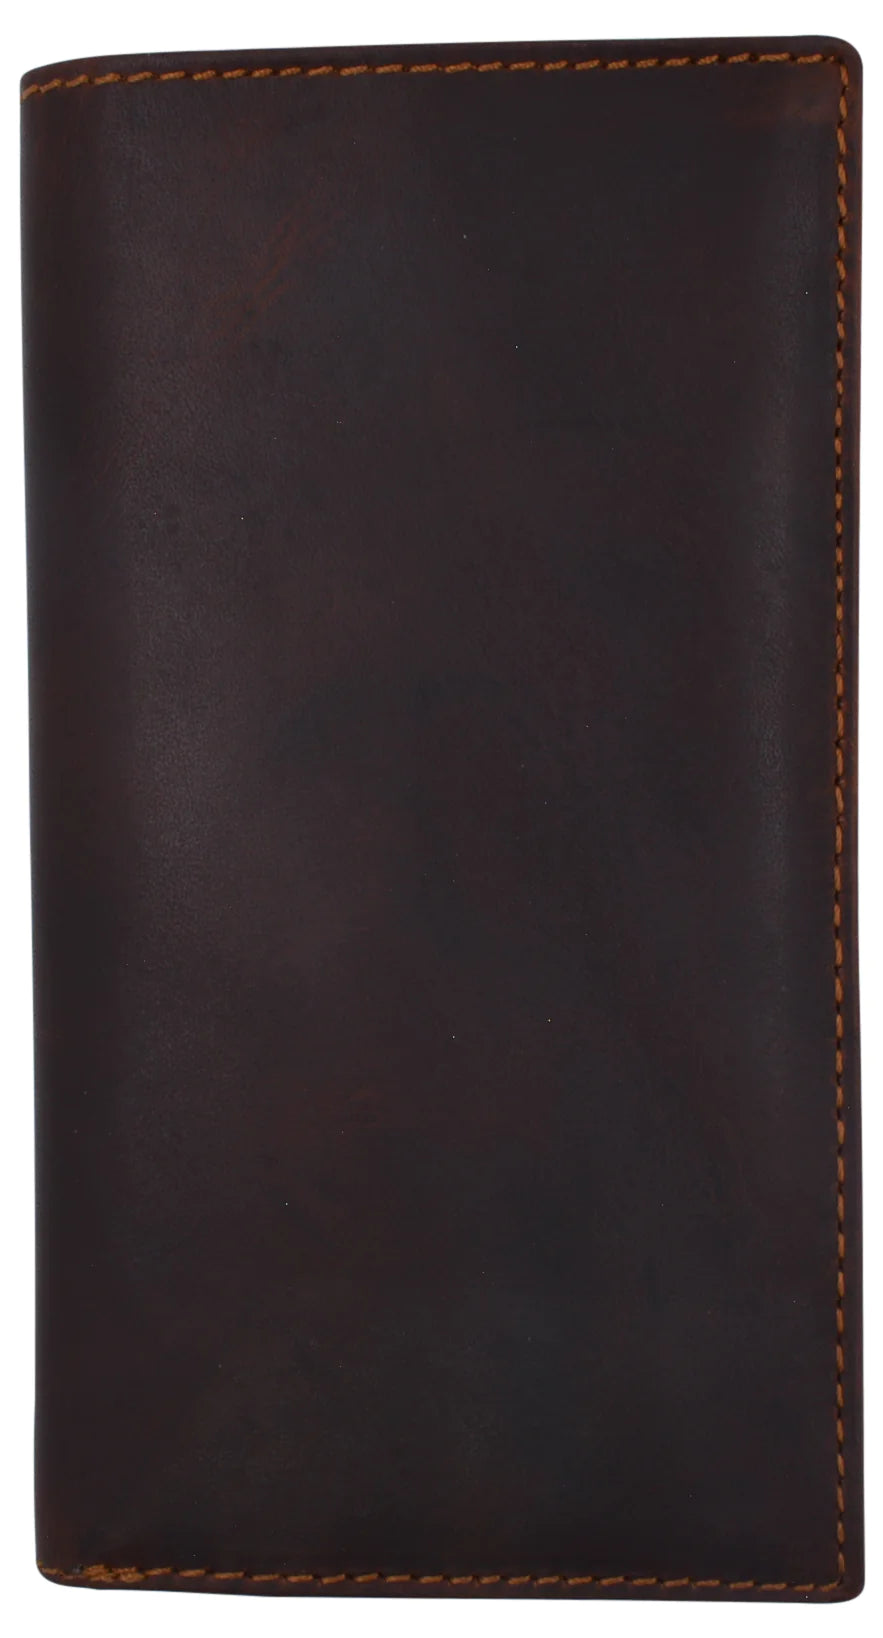 RFID Blocking Hunter Brown Leather Long Bifold Checkbook Wallet Cover